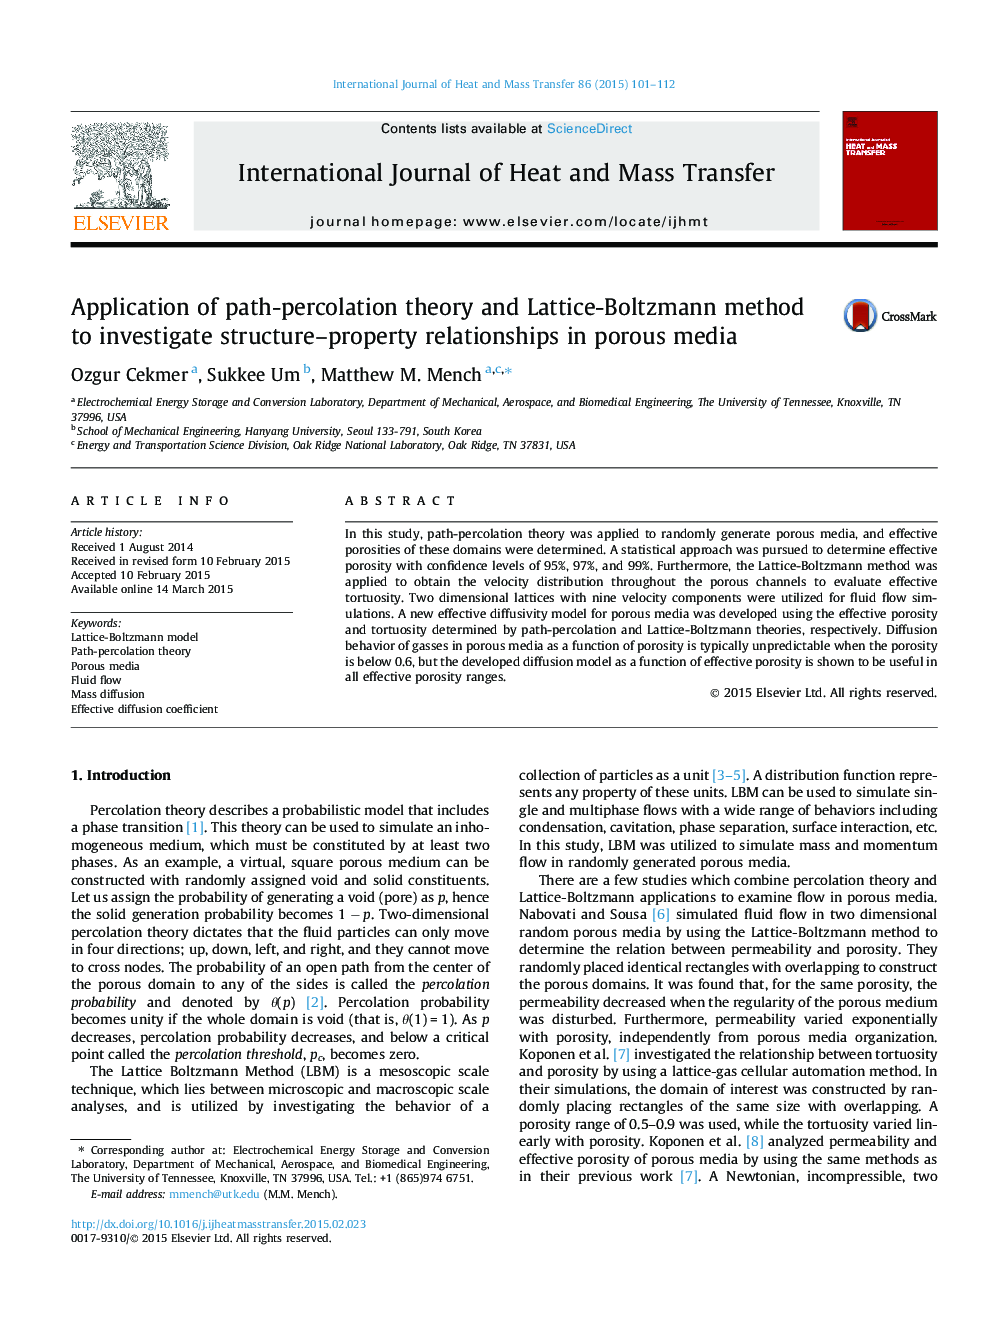 Application of path-percolation theory and Lattice-Boltzmann method to investigate structure–property relationships in porous media